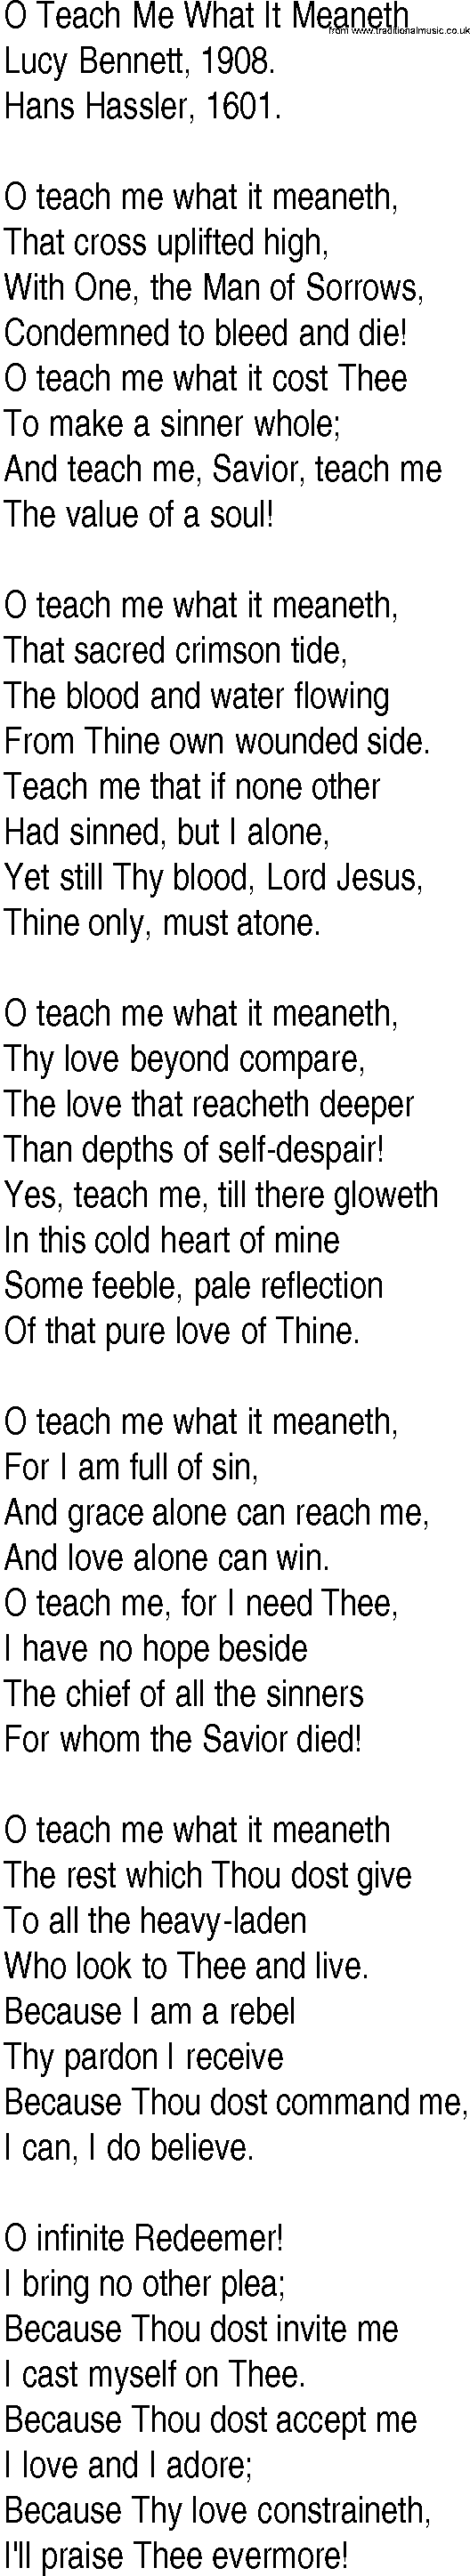 Hymn and Gospel Song: O Teach Me What It Meaneth by Lucy Bennett lyrics